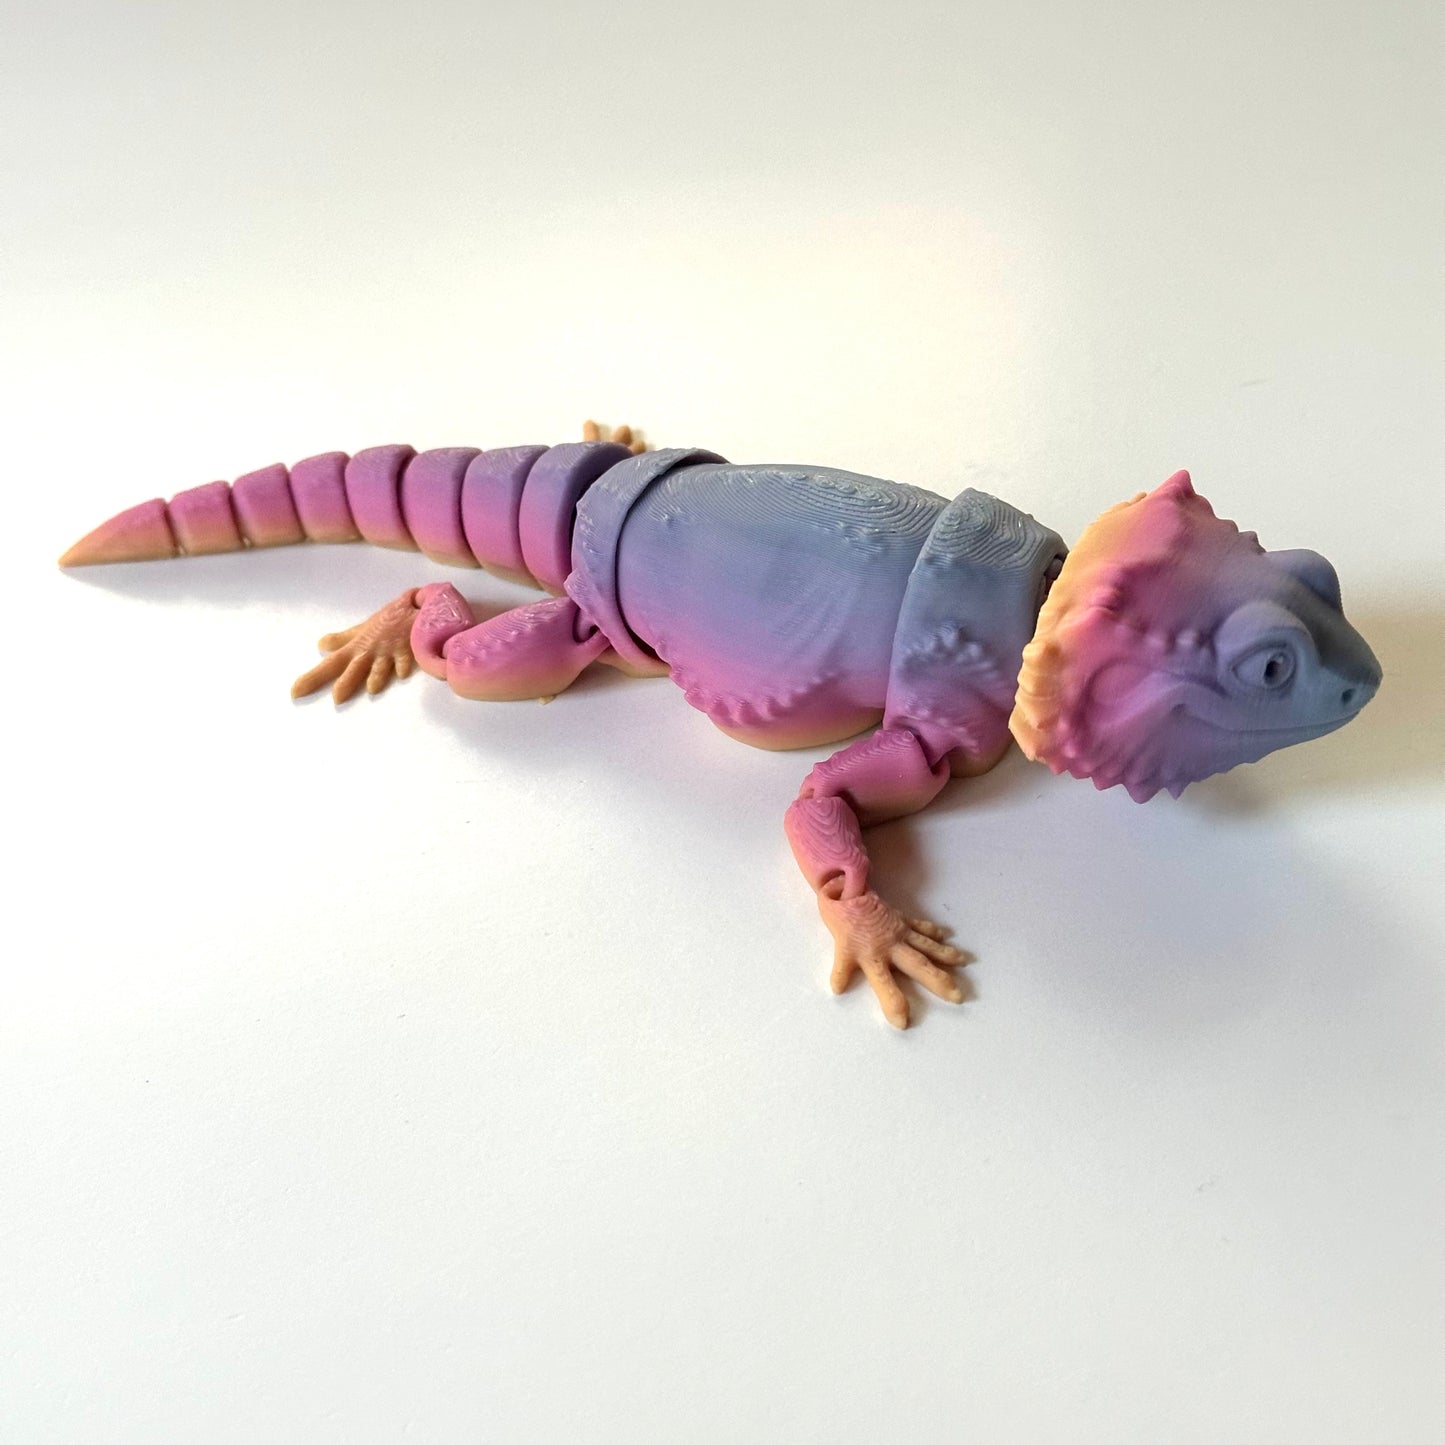 Bearded Dragon - 3D Printed Articulating Figure No